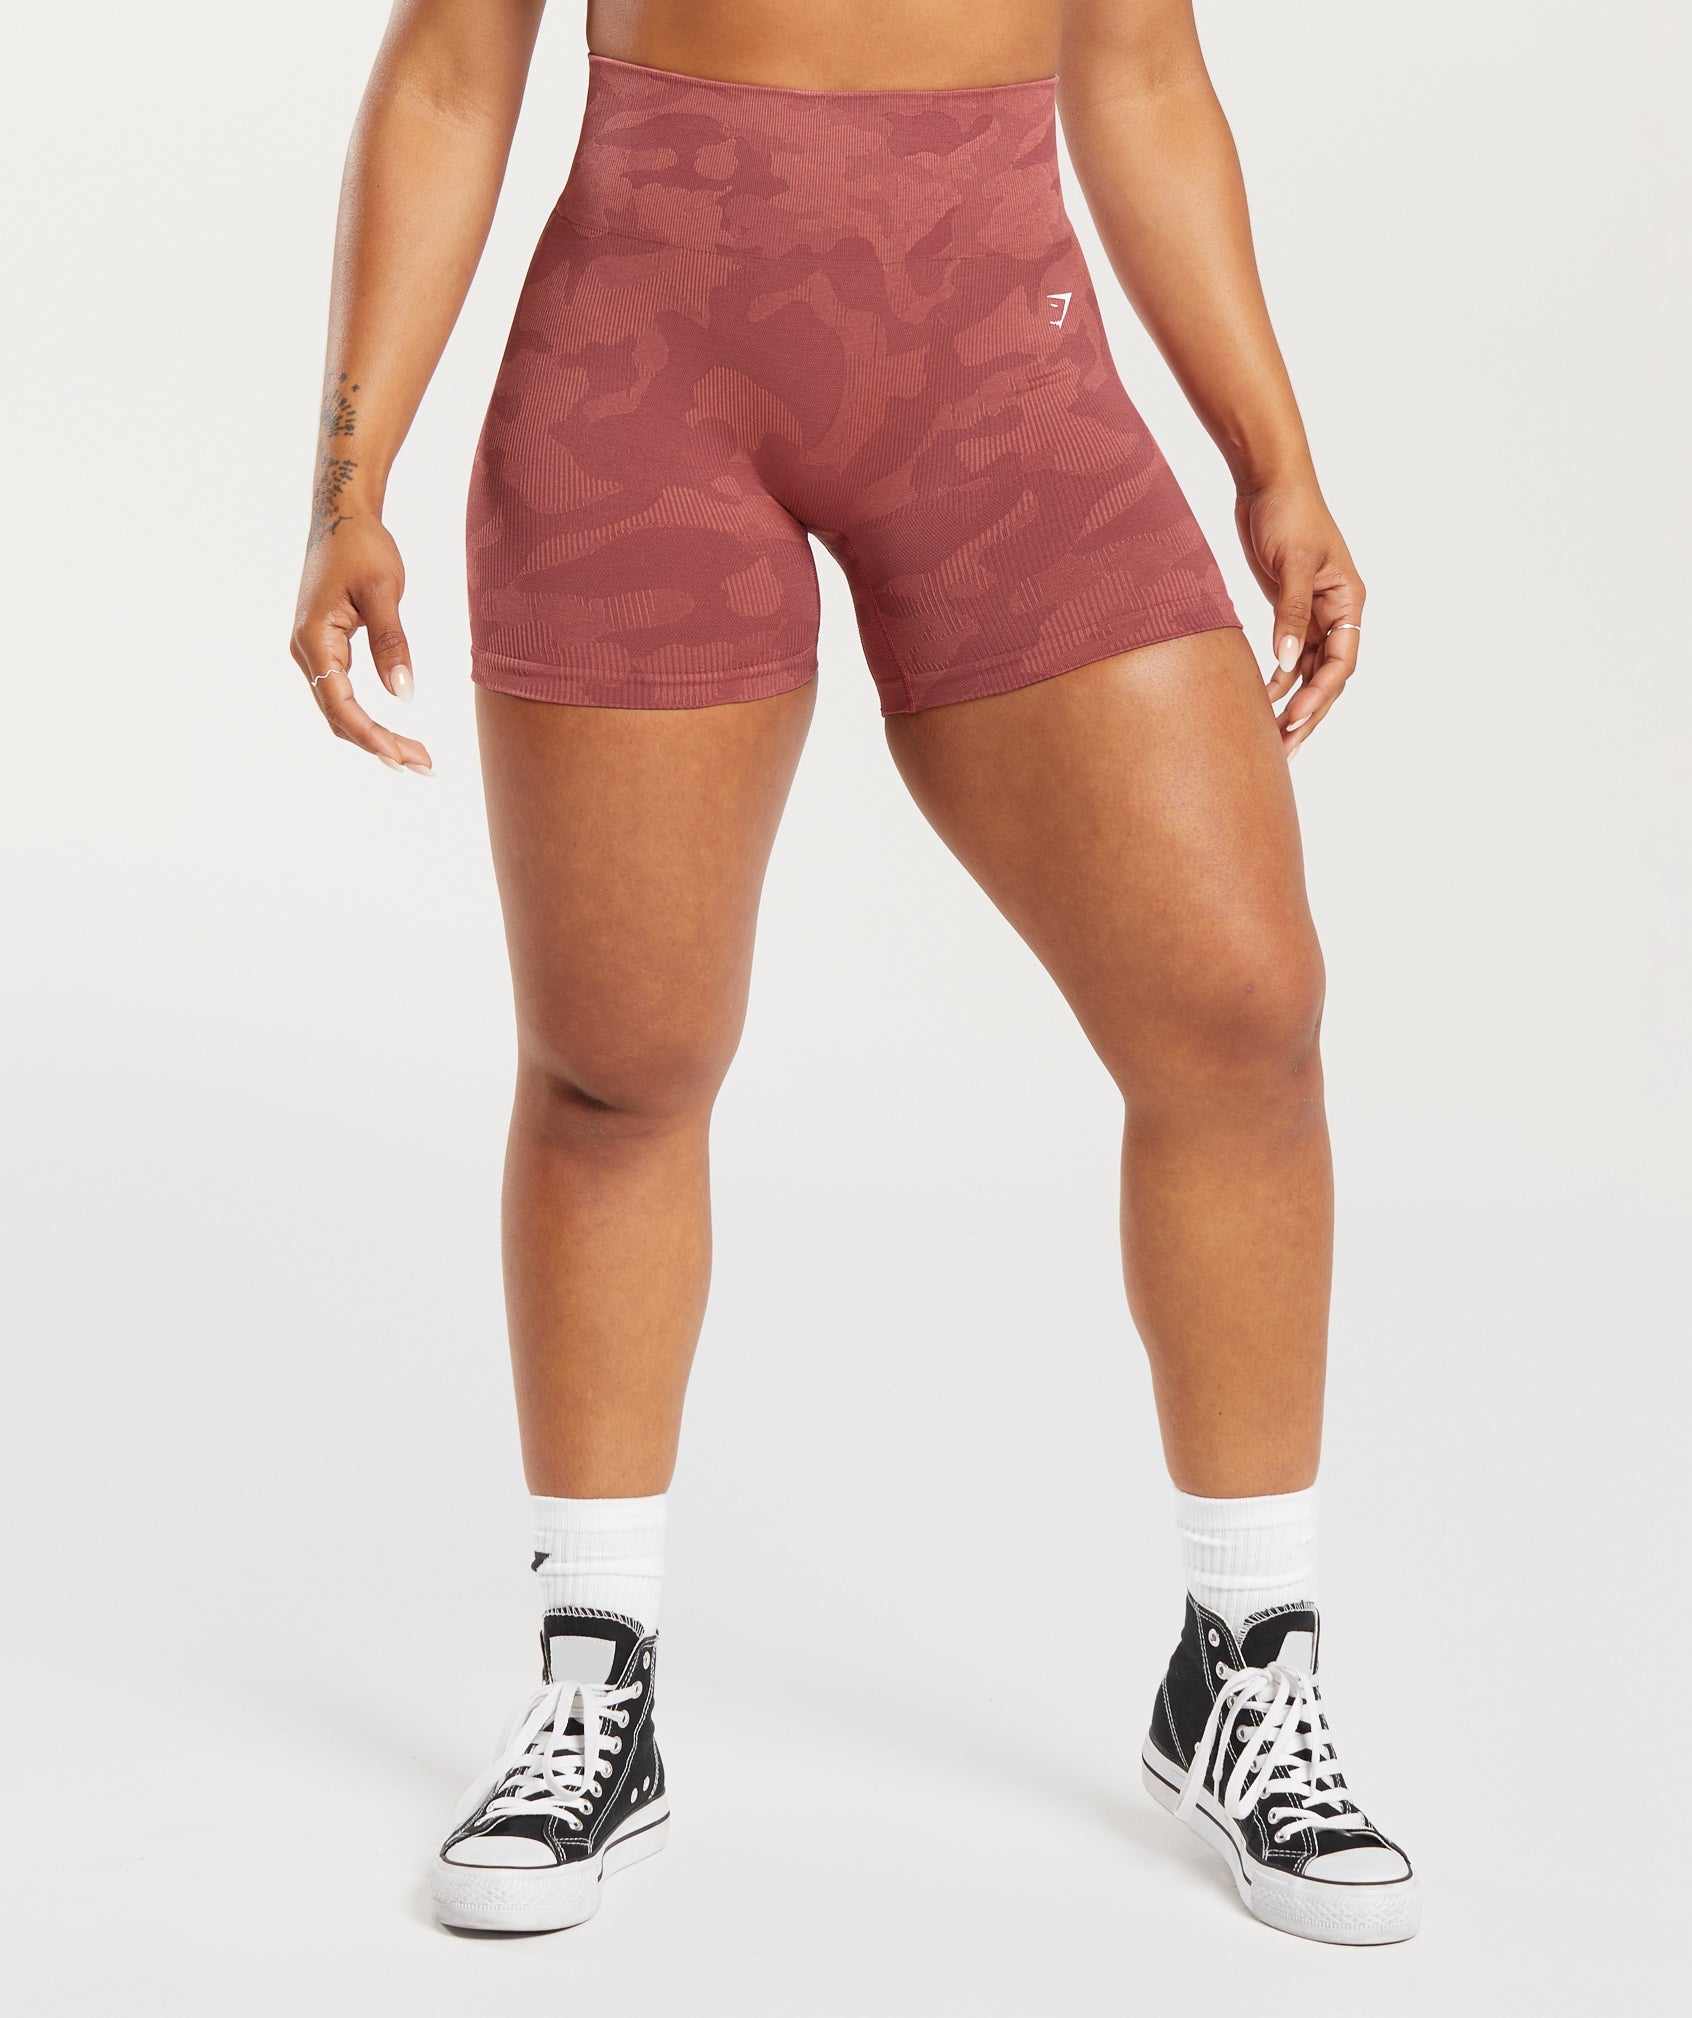 Gymshark Adapt Camo Seamless Ribbed Shorts - Soft Berry/Sunbaked Pink